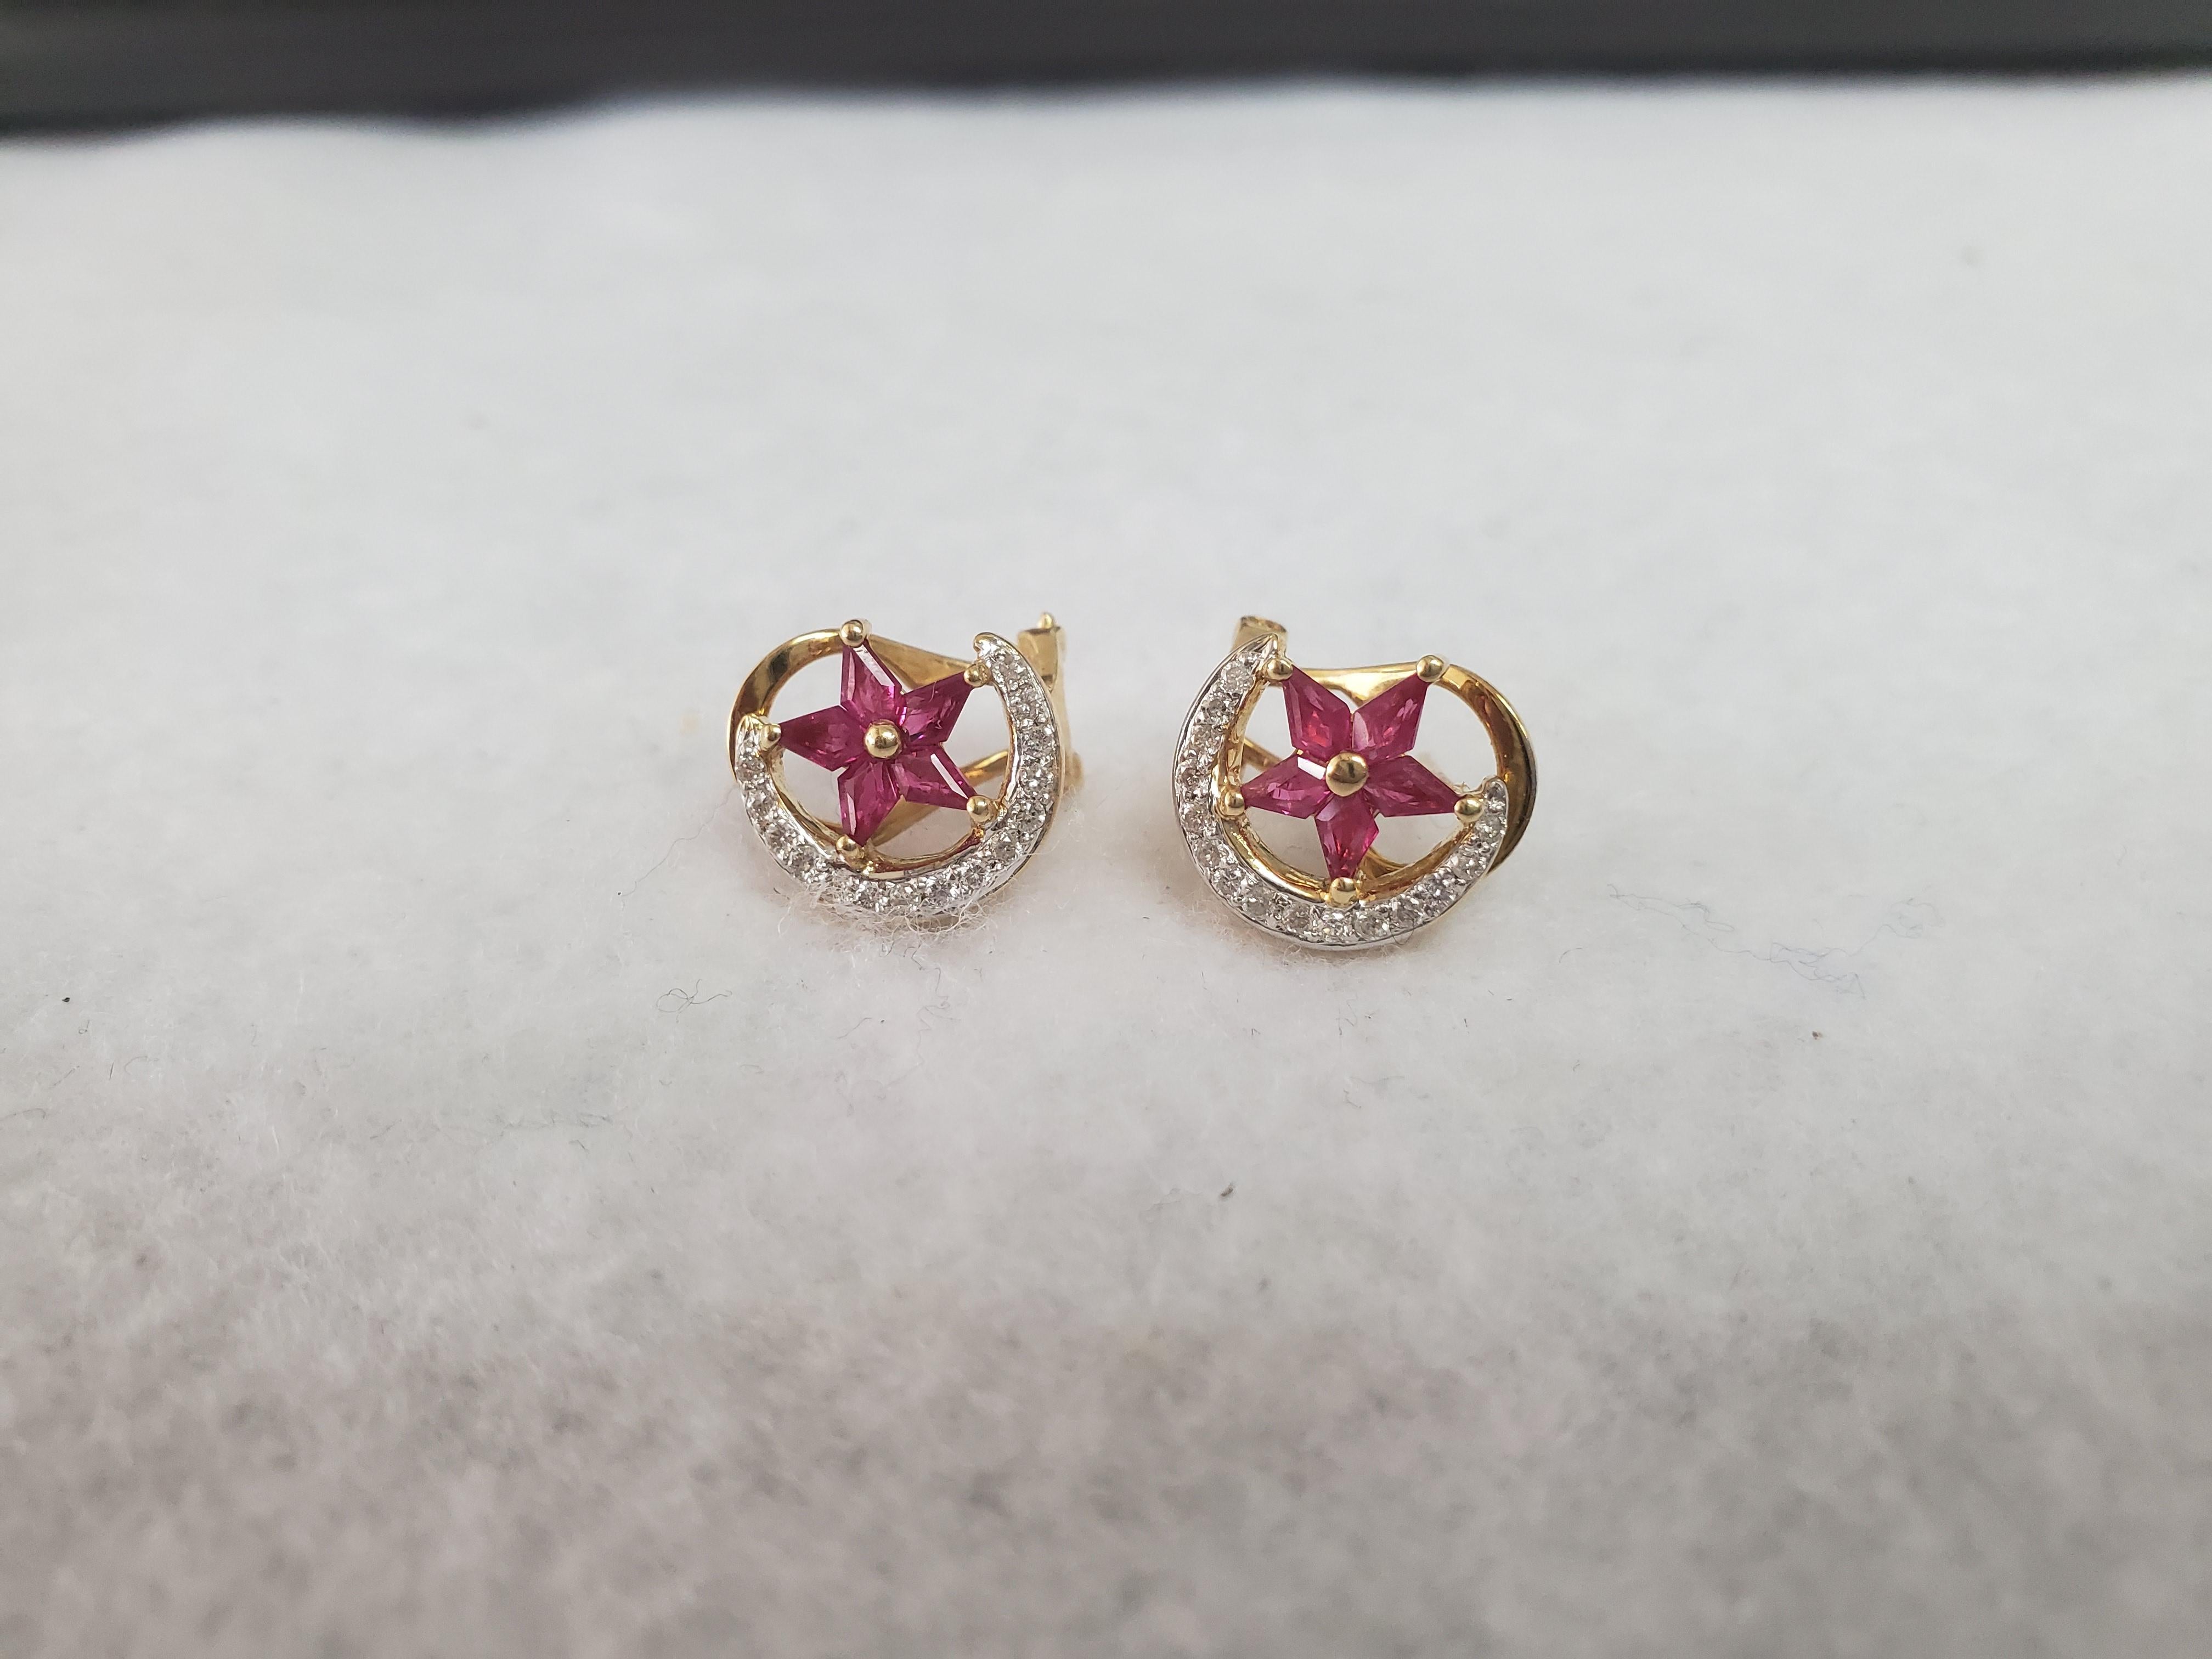 Star & Crescent Moon Ruby Diamond Earrings 14k Yellow Gold In New Condition For Sale In Sugar Land, TX